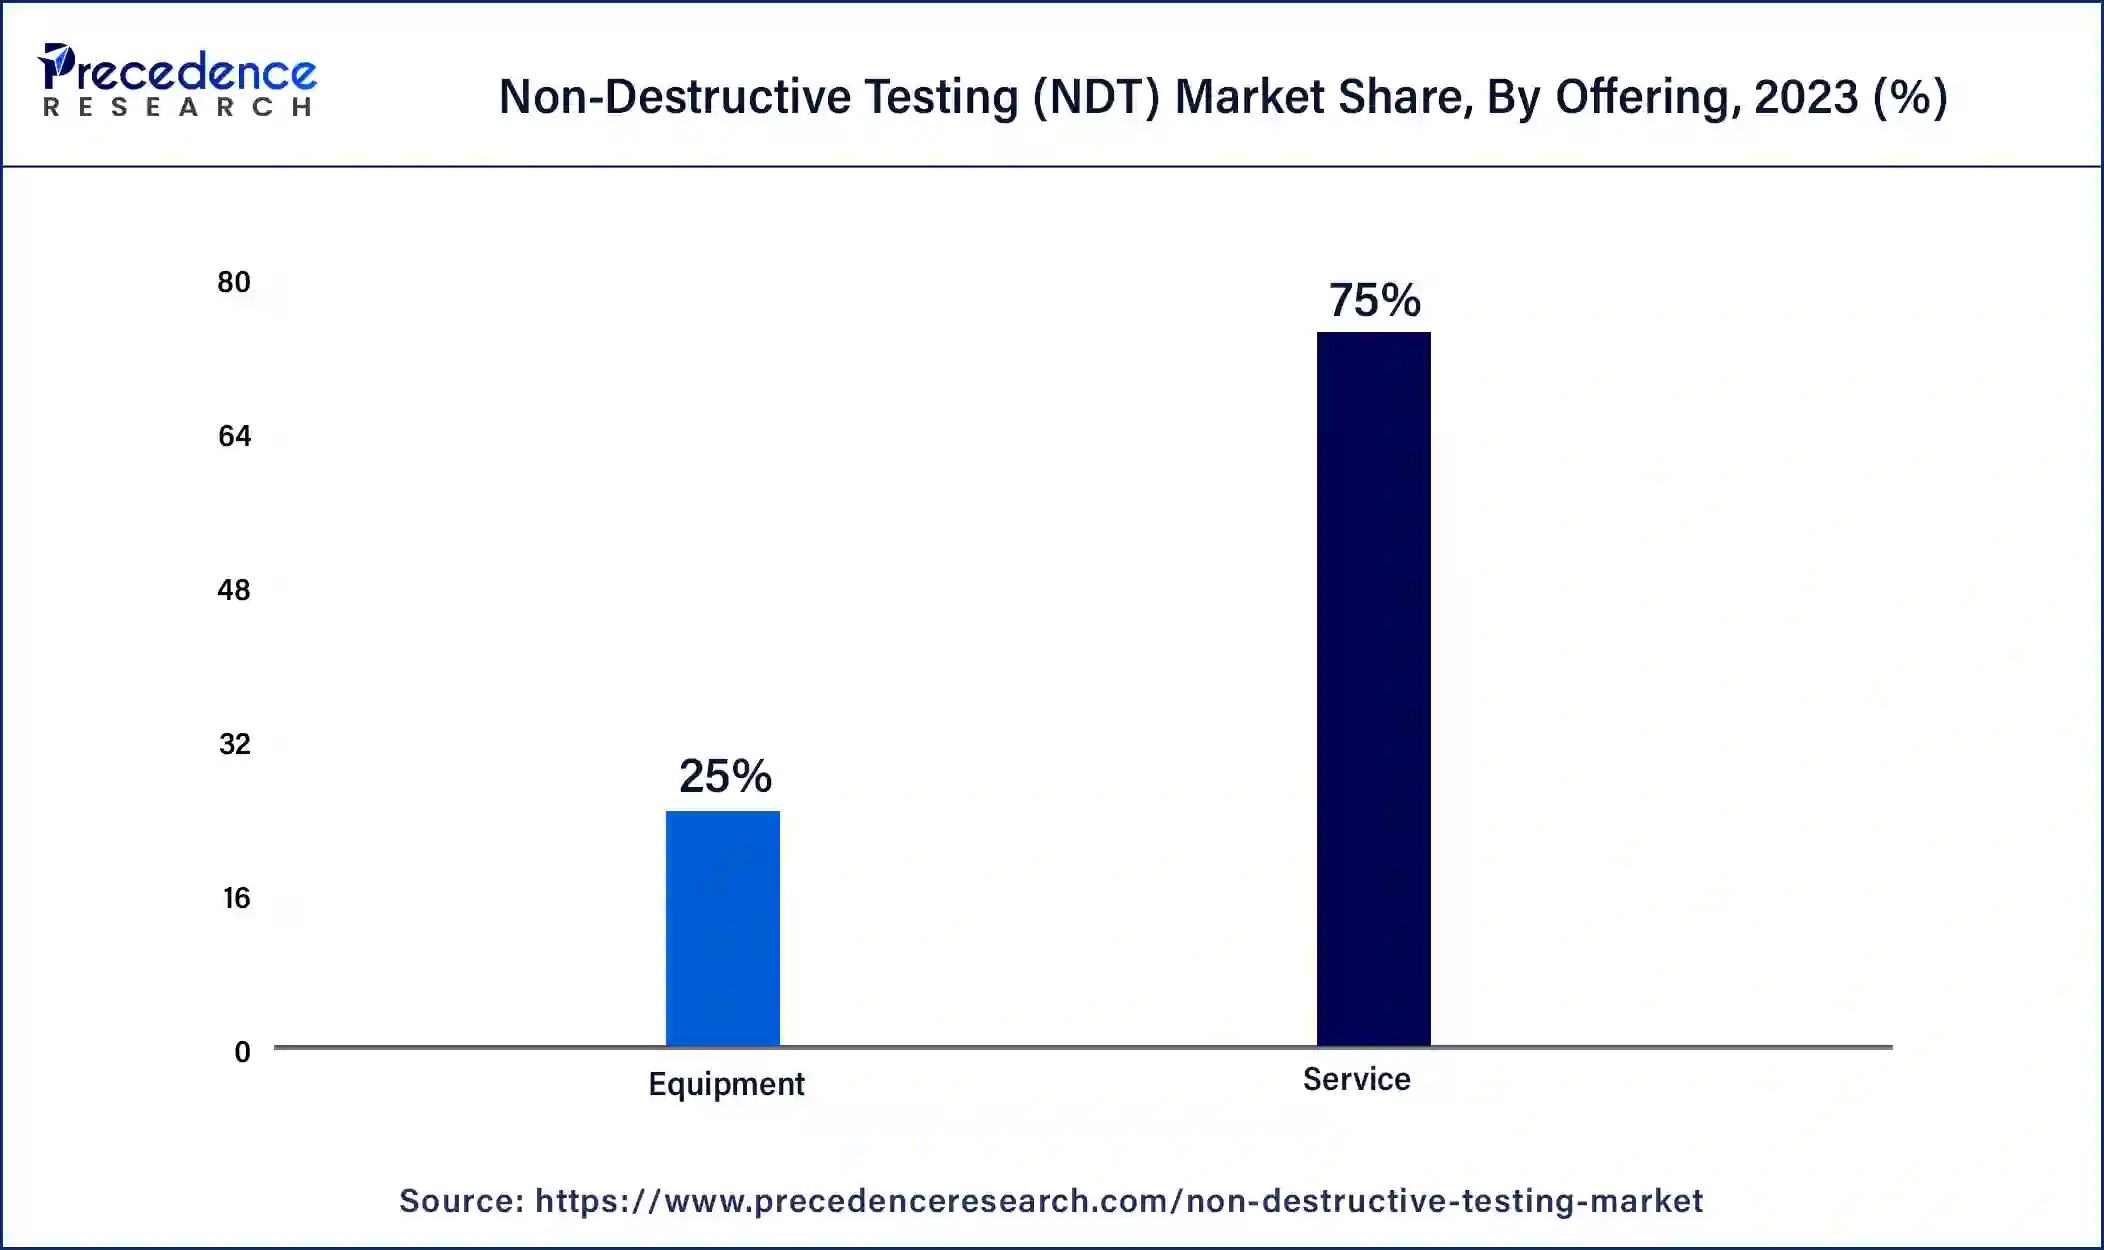 Non-Destructive Testing (NDT) Market Share, By Offering, 2023 (%)